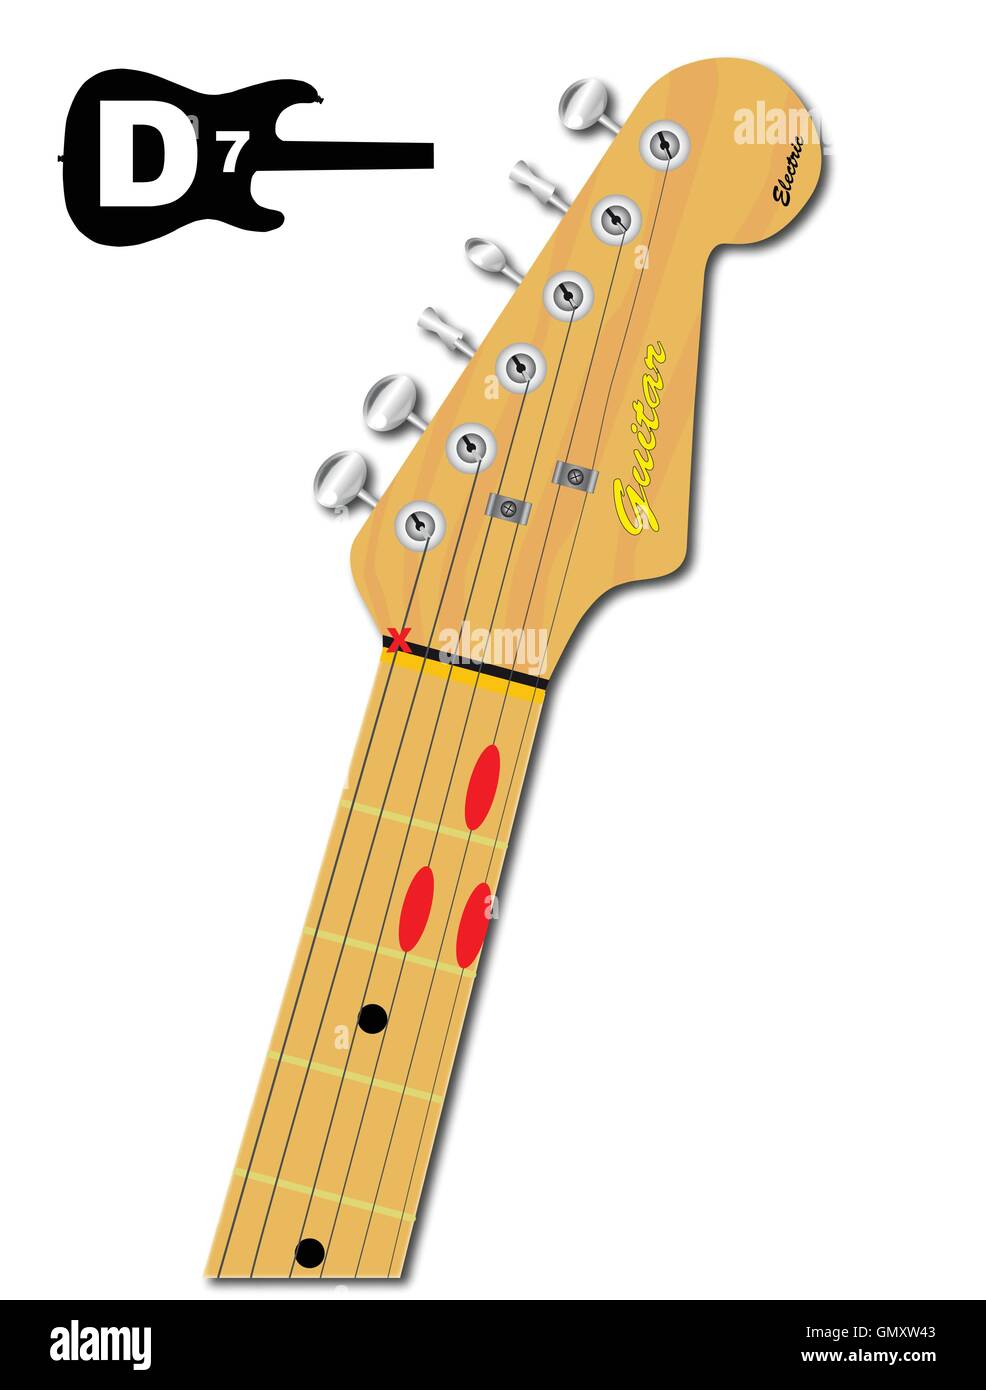 The Guitar Chord Of D Seven Stock Vector